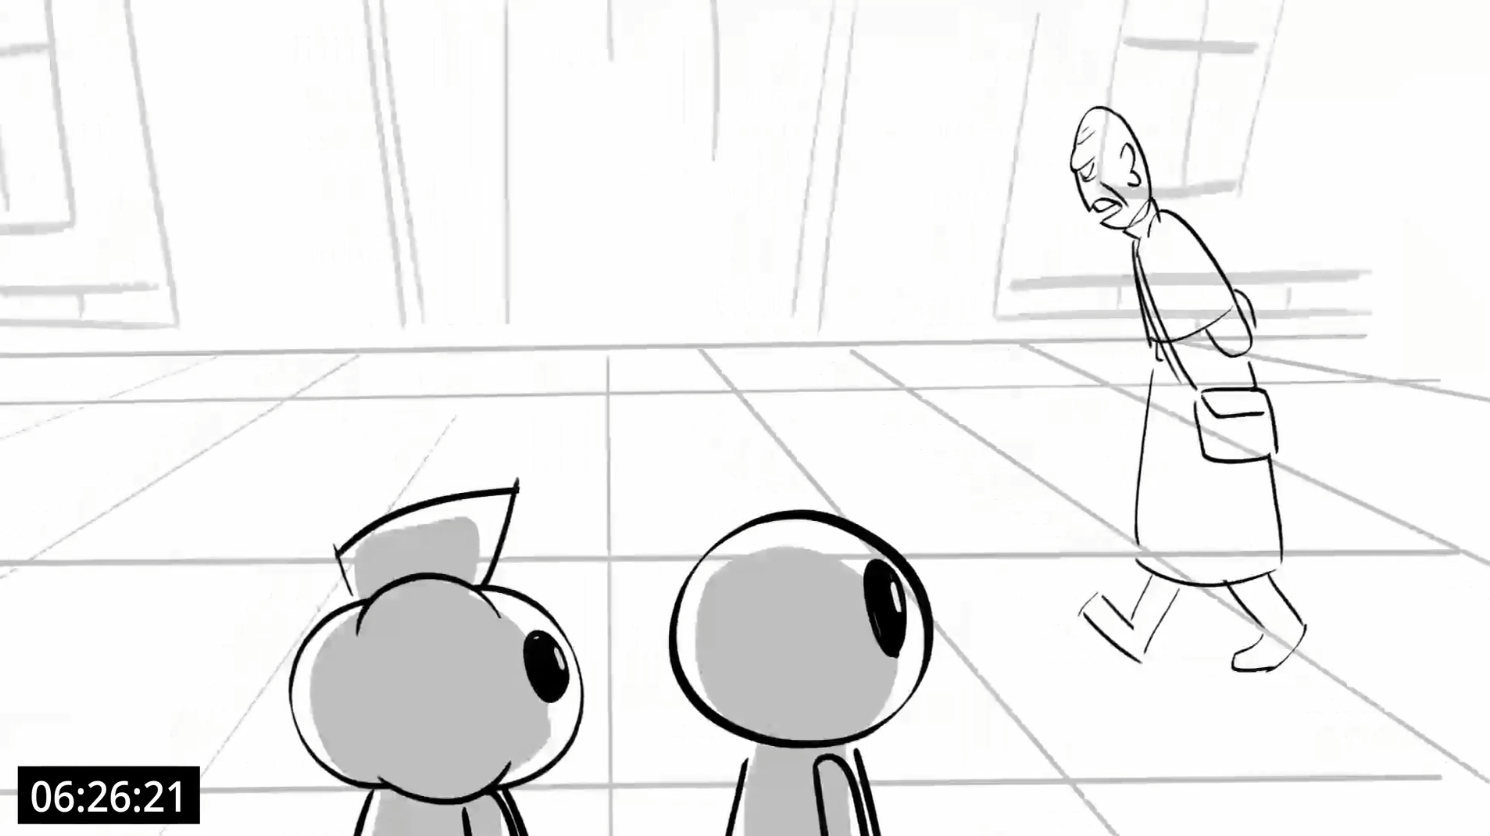 Spooky Month 6: Animatic Progress  by SpookyMonth from Patreon